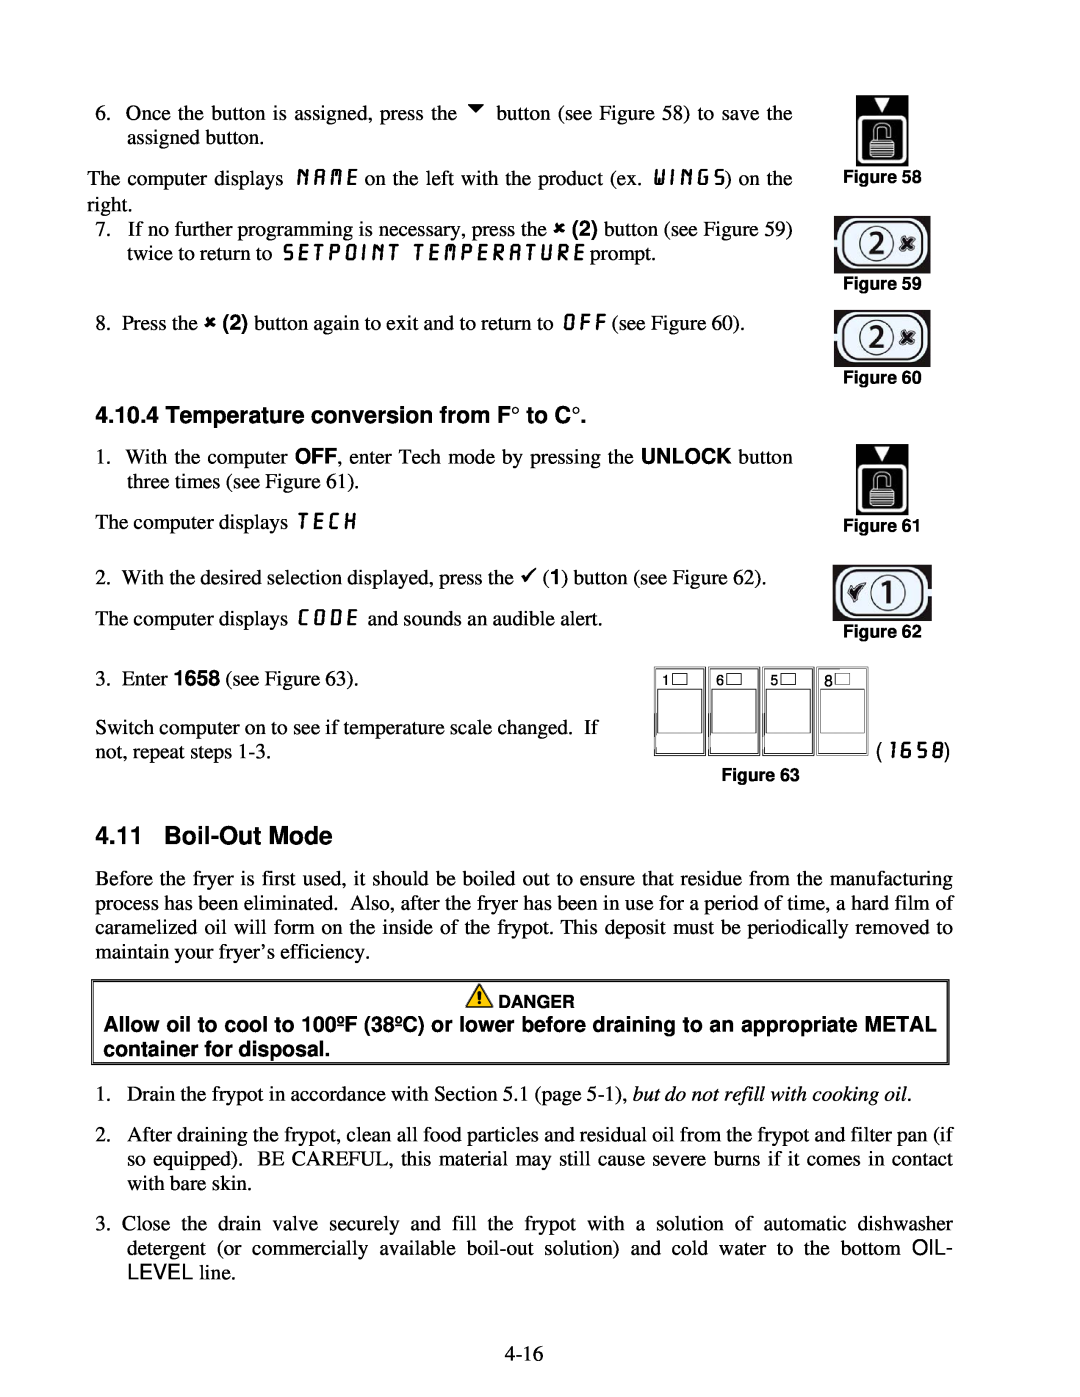 Frymaster 8196339 operation manual Boil-Out Mode, Temperature conversion from F to C, 1658 